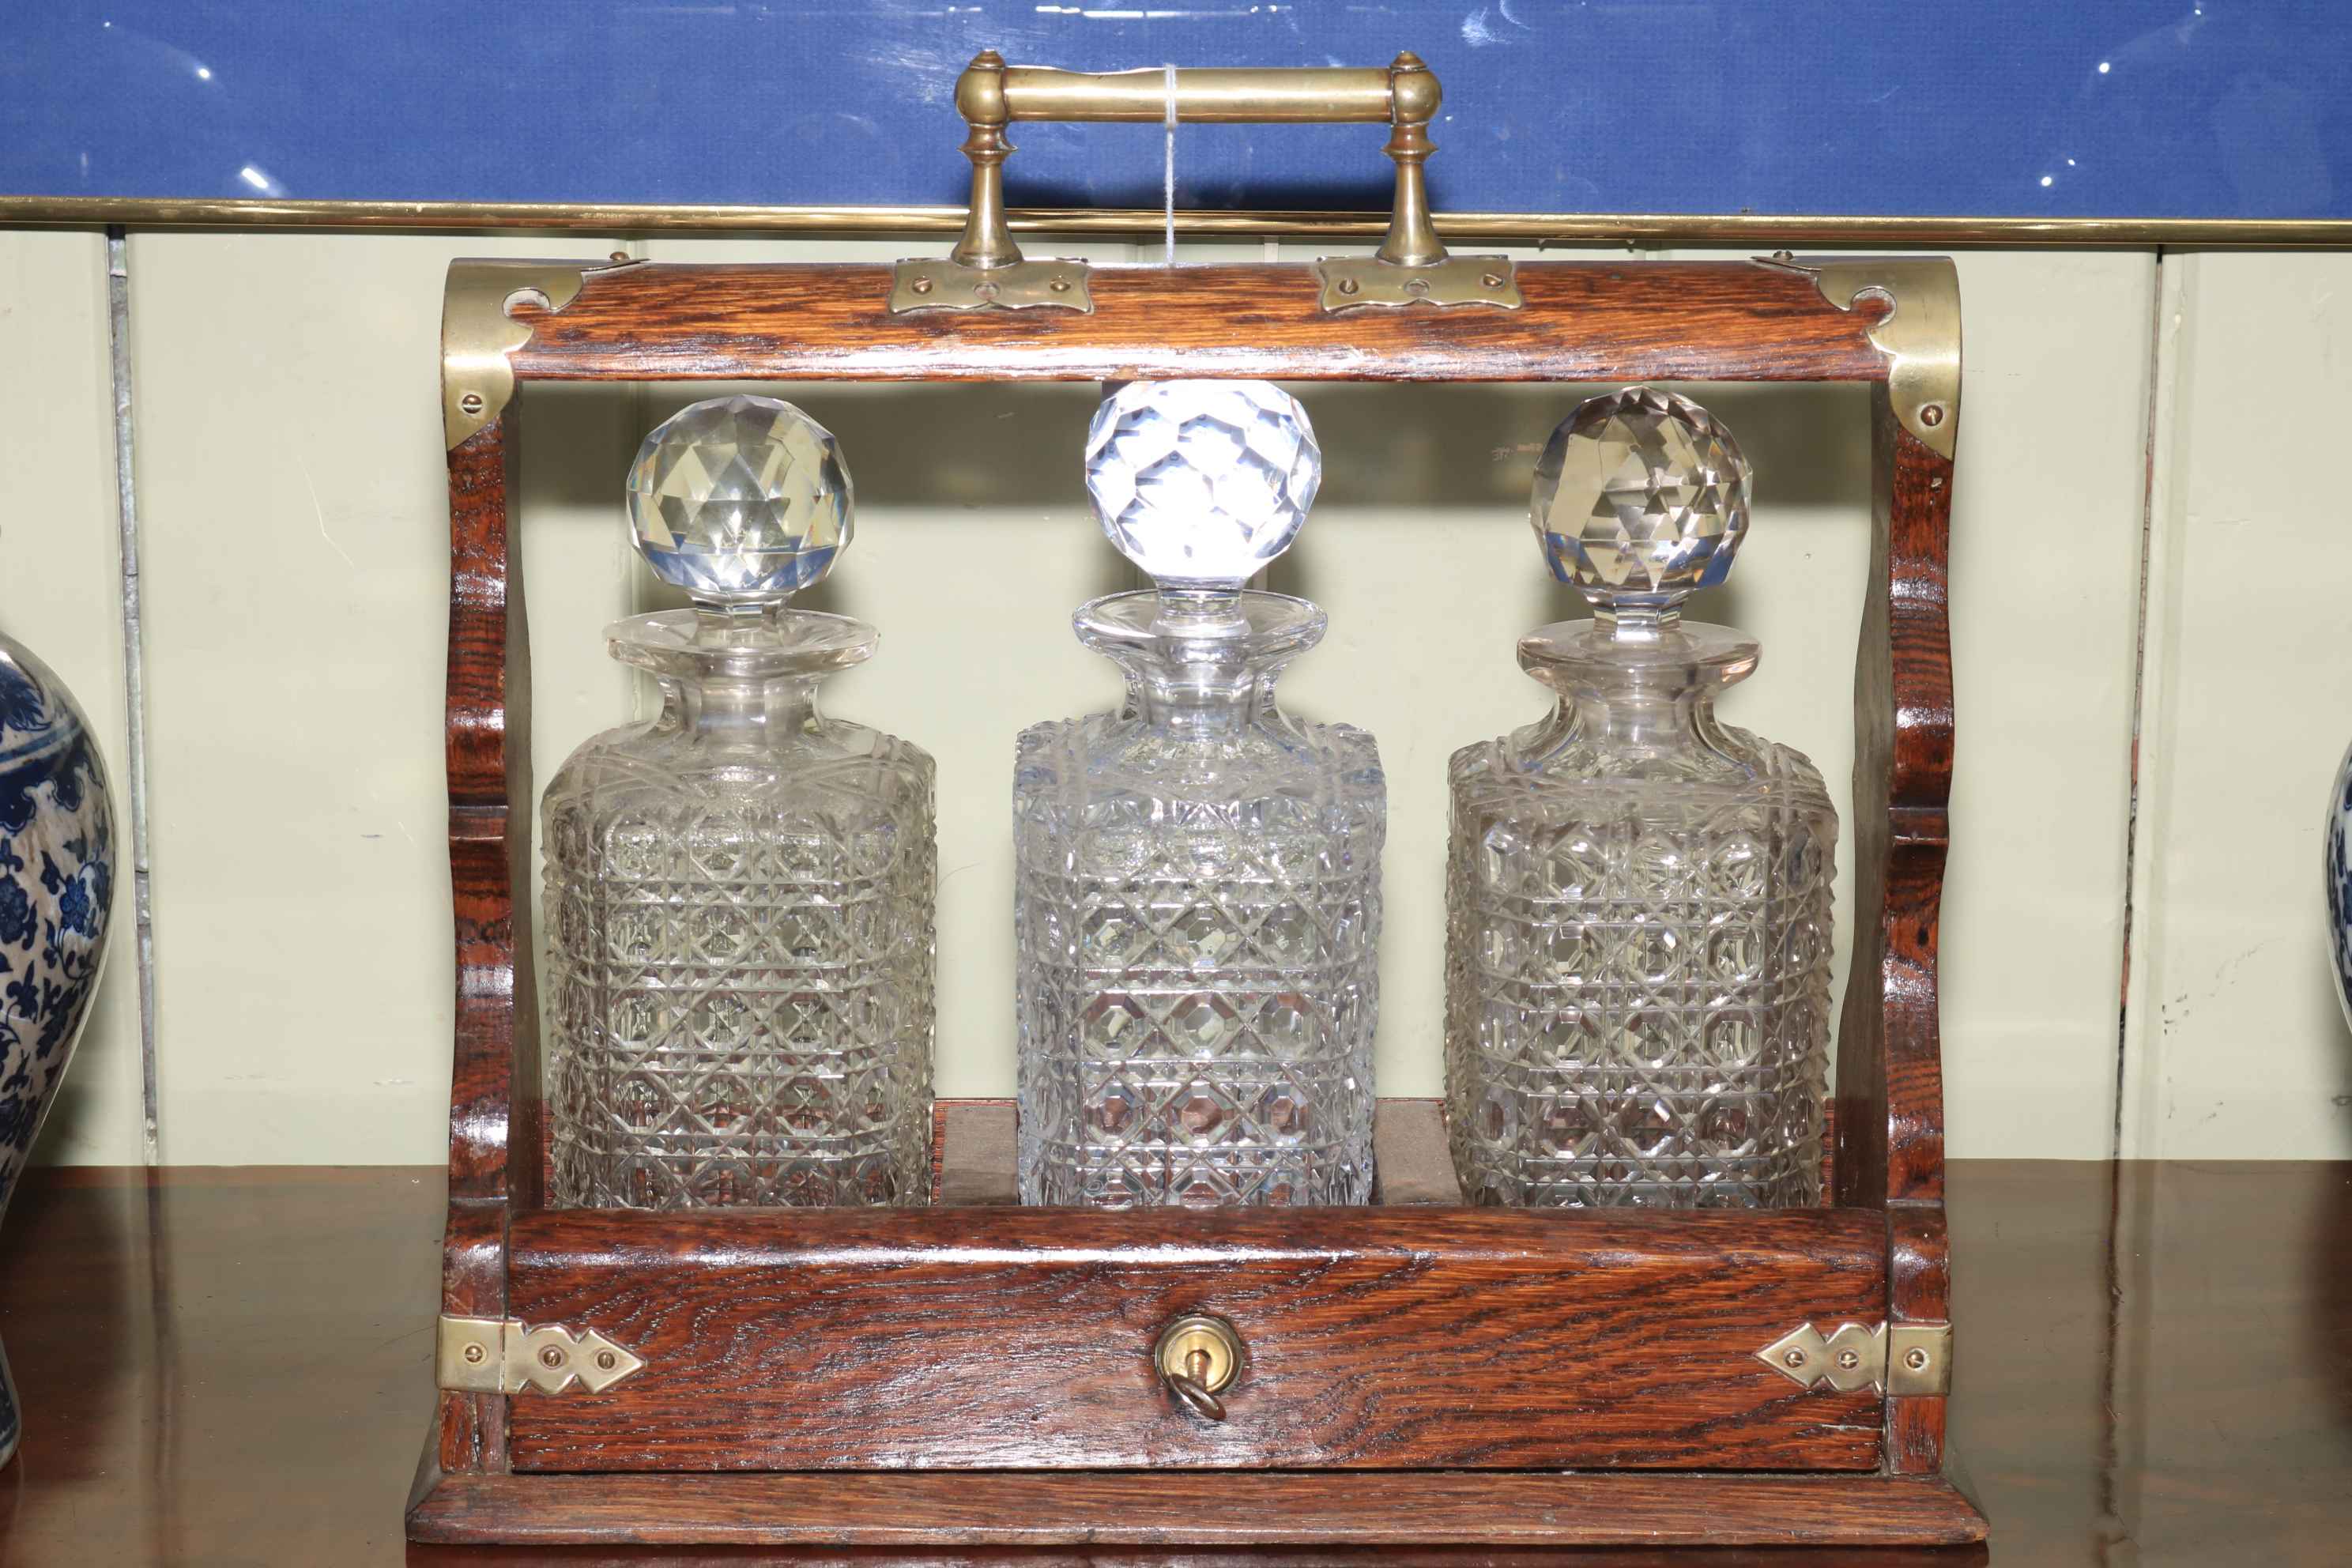 Oak tantalus with three matched crystal decanters.